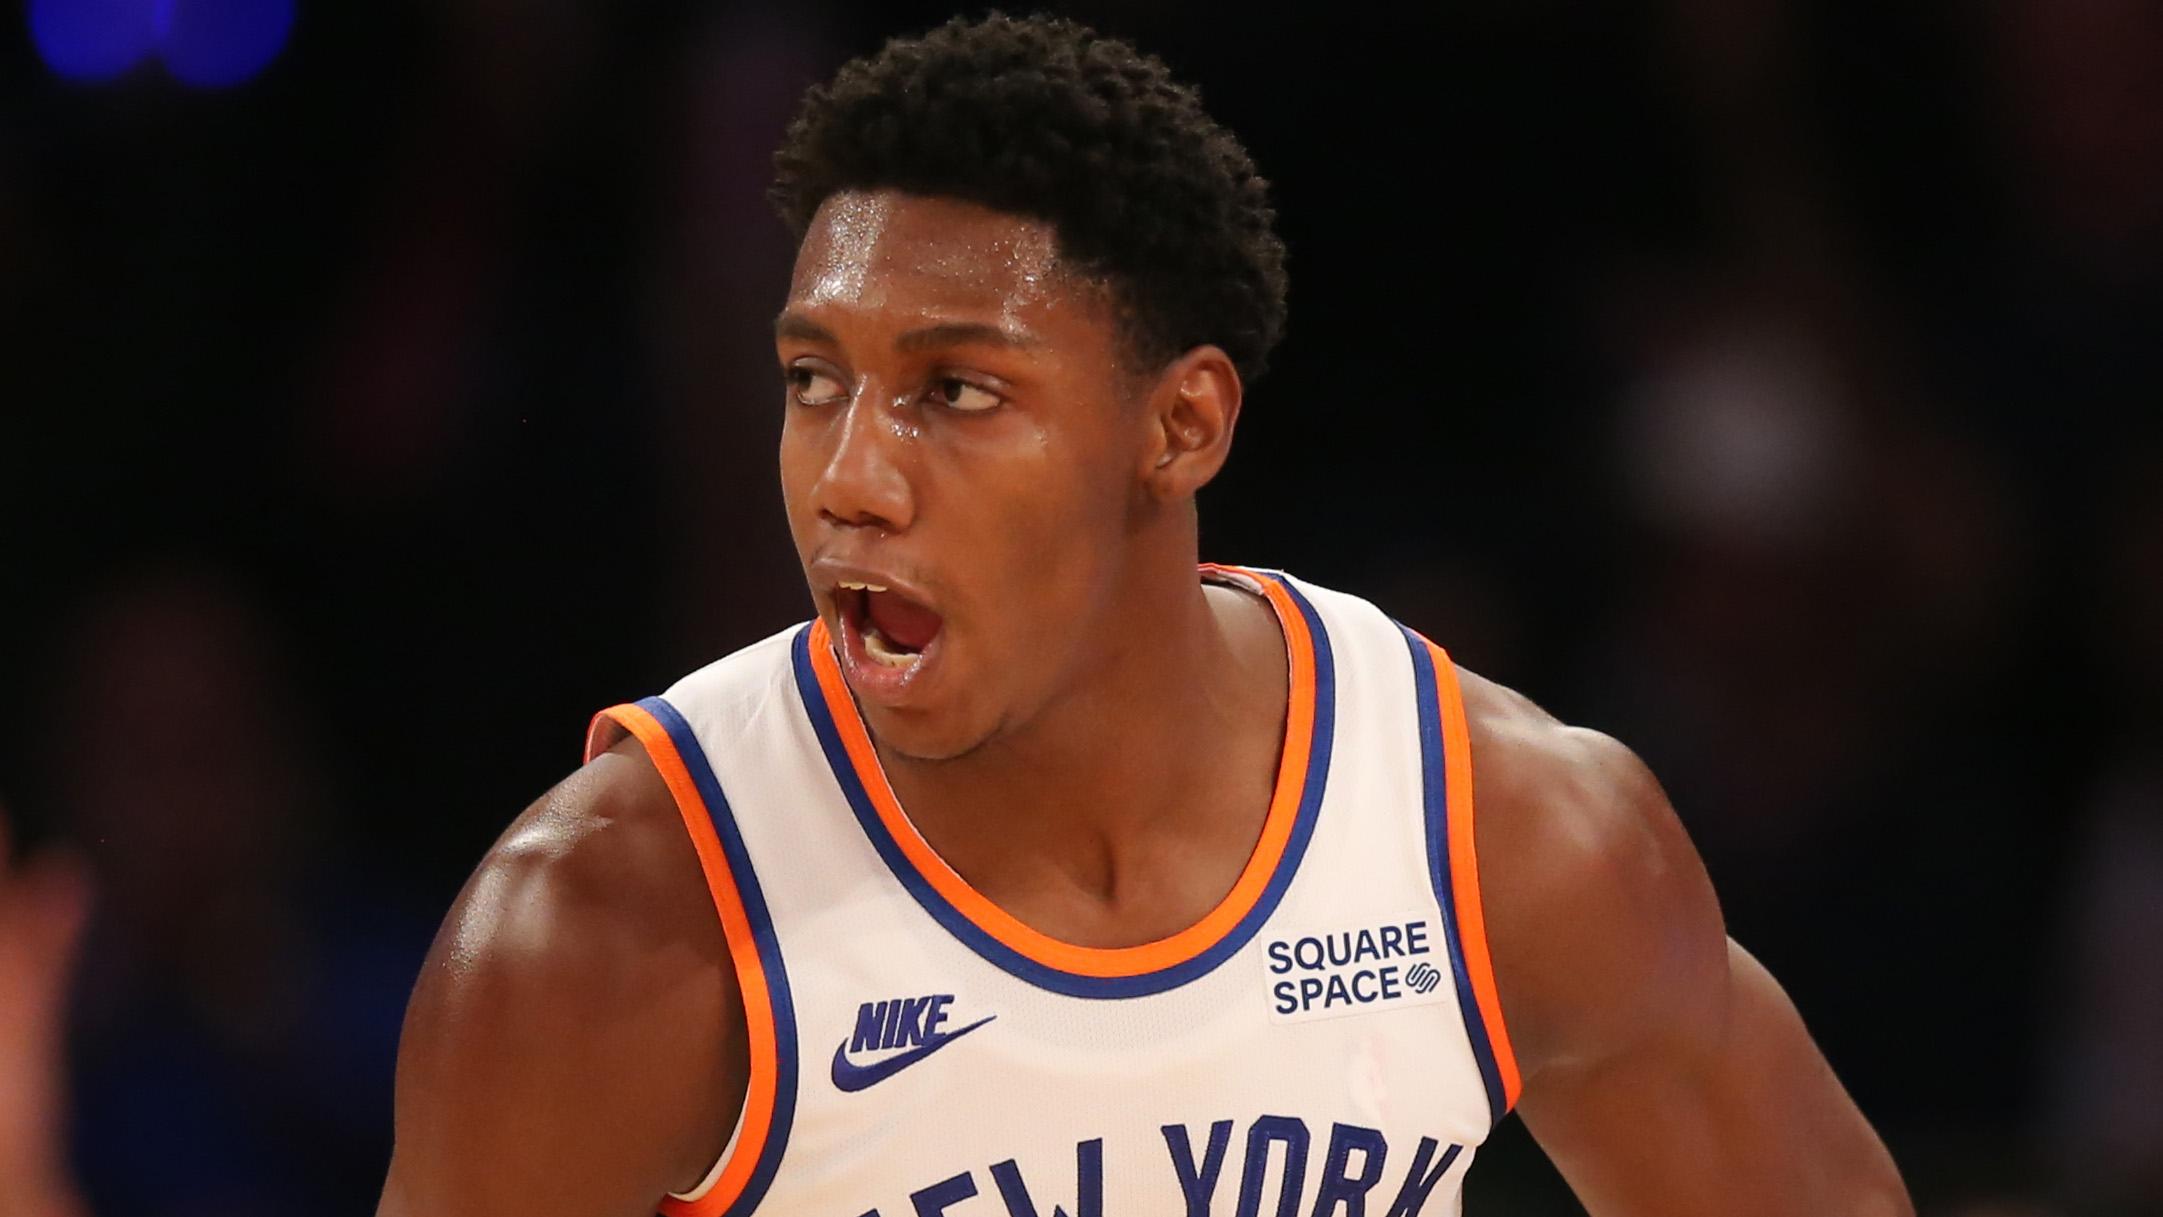 Oct 20, 2021; New York, New York, USA; New York Knicks guard RJ Barrett (9) reacts after a three point shot against the Boston Celtics during the third quarter at Madison Square Garden. / Brad Penner-USA TODAY Sports